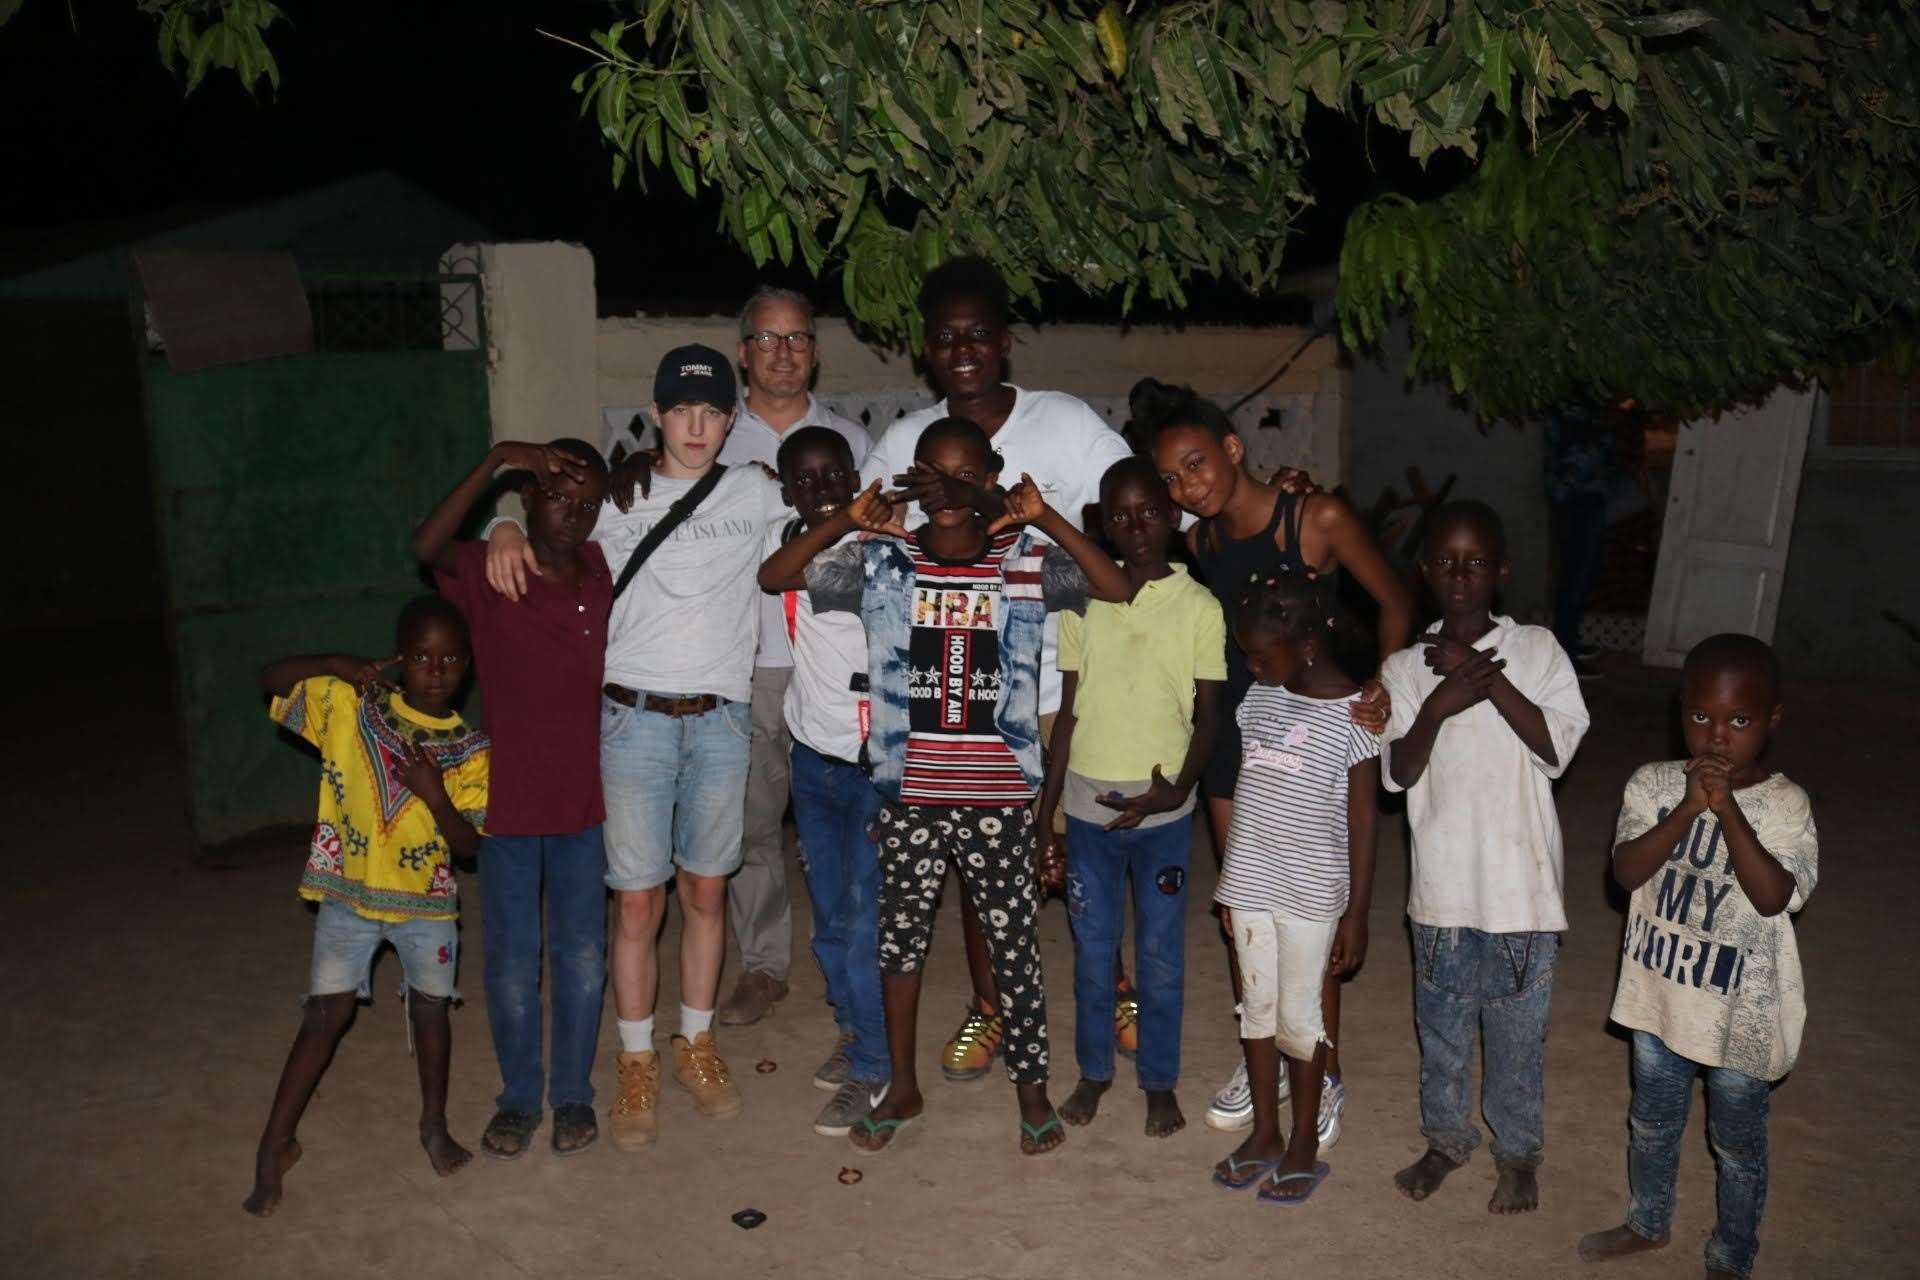 Adam, Francis, Kanye and Kalila with some of the local children in Gambia